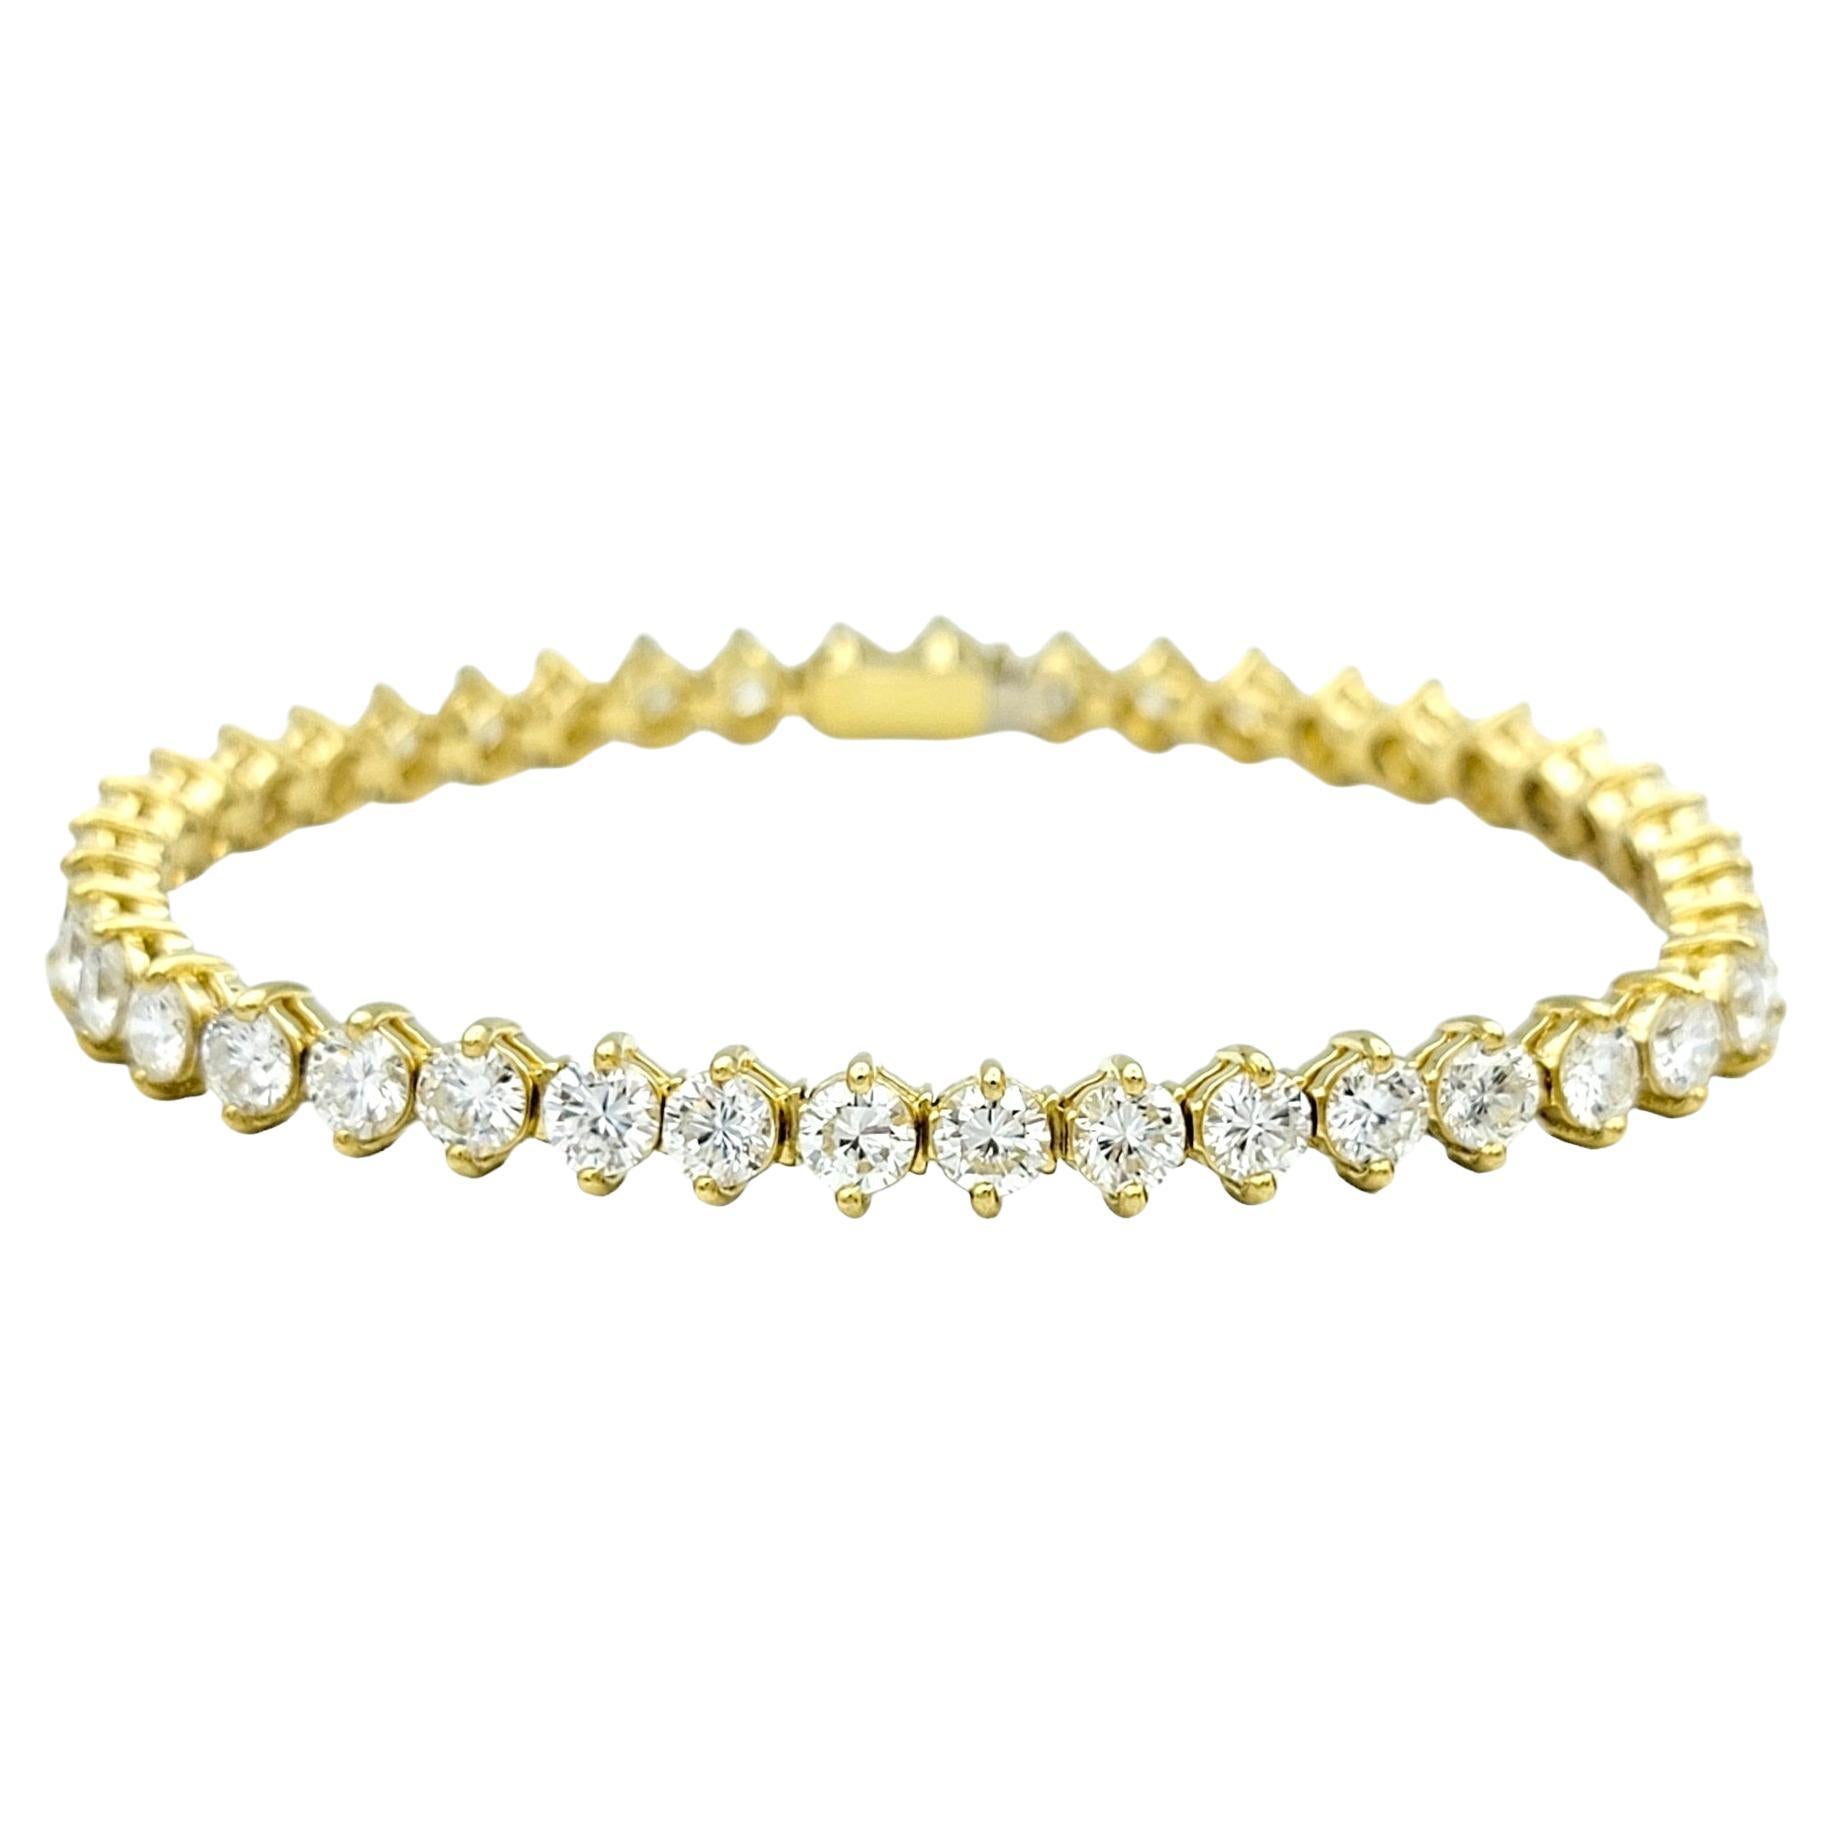 This gorgeous diamond tennis bracelet, exquisitely set in radiant 18 karat yellow gold, is a timeless symbol of elegance and sophistication. Each round diamond is meticulously hand-set in a continuous line, creating a seamless flow of sparkle and